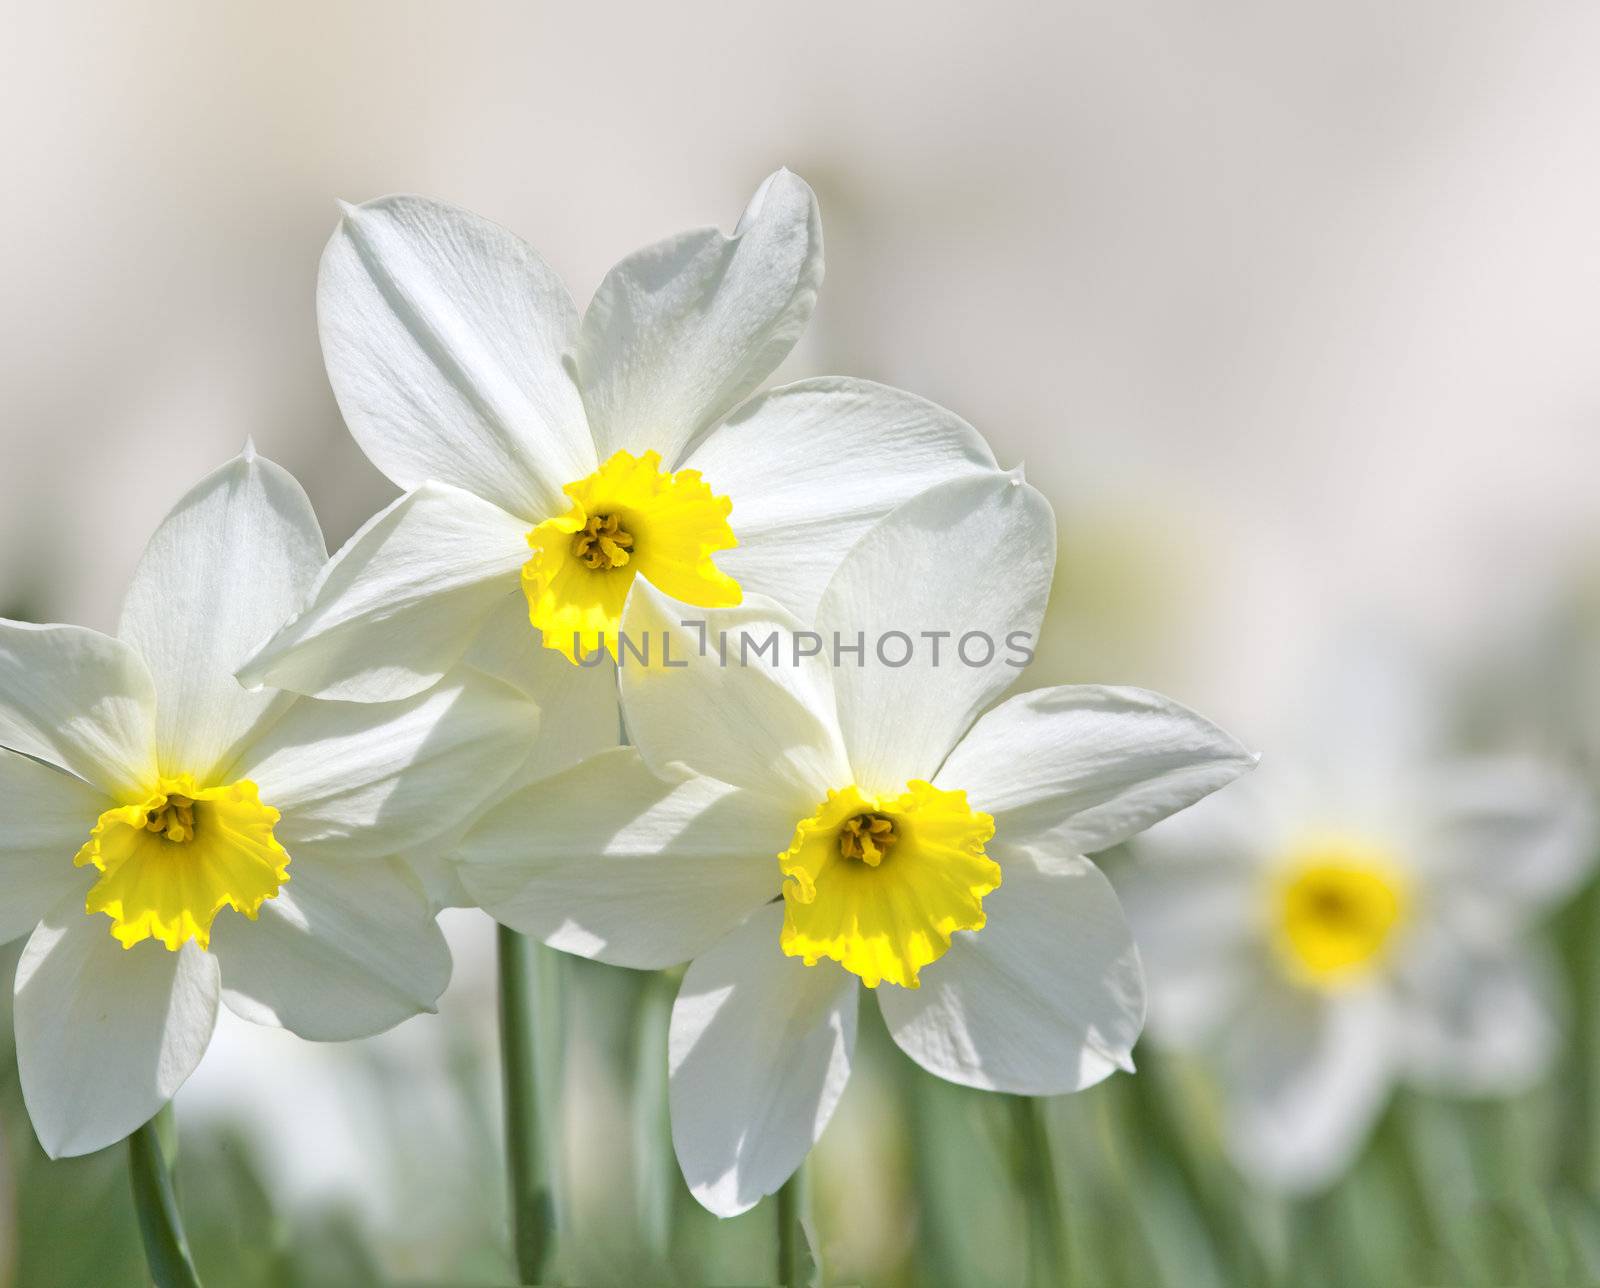 A photography of some nice narcissus flowers